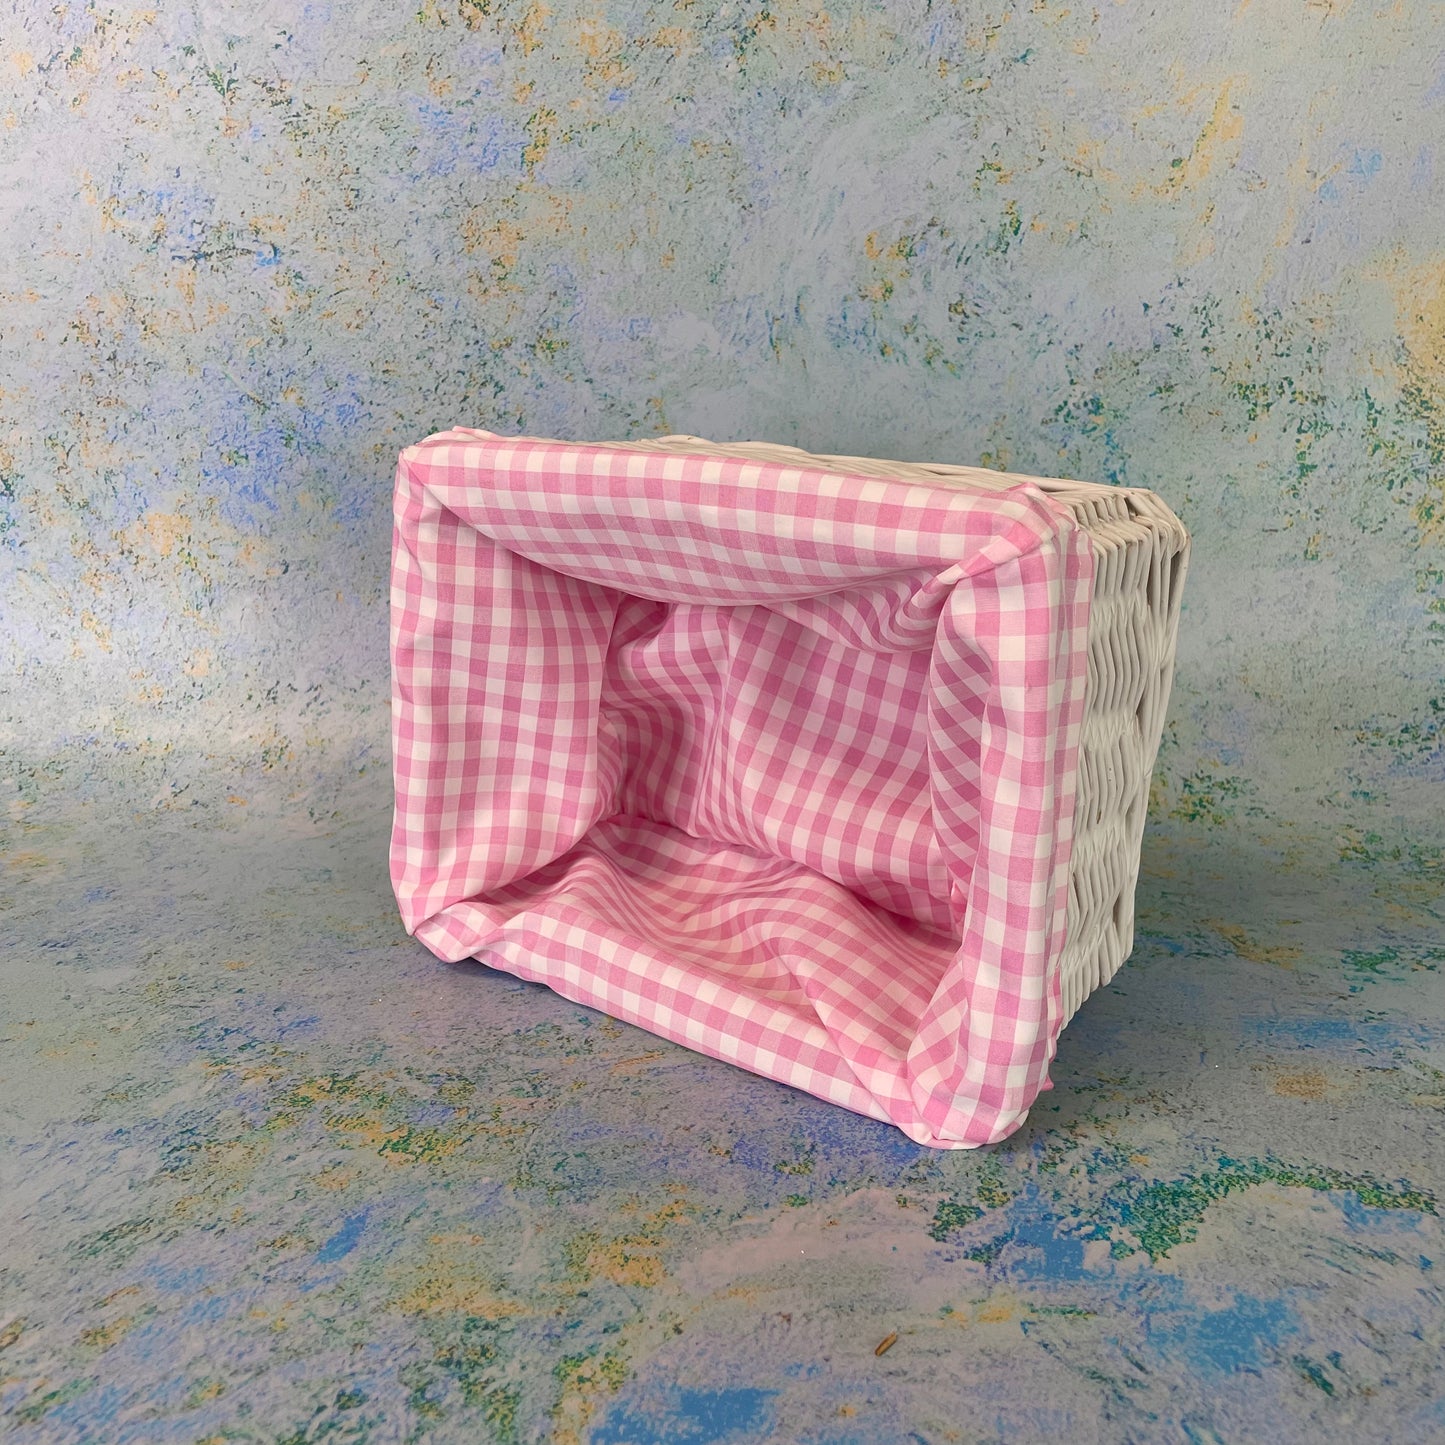 Wicker Basket with Pink Gingham Lining